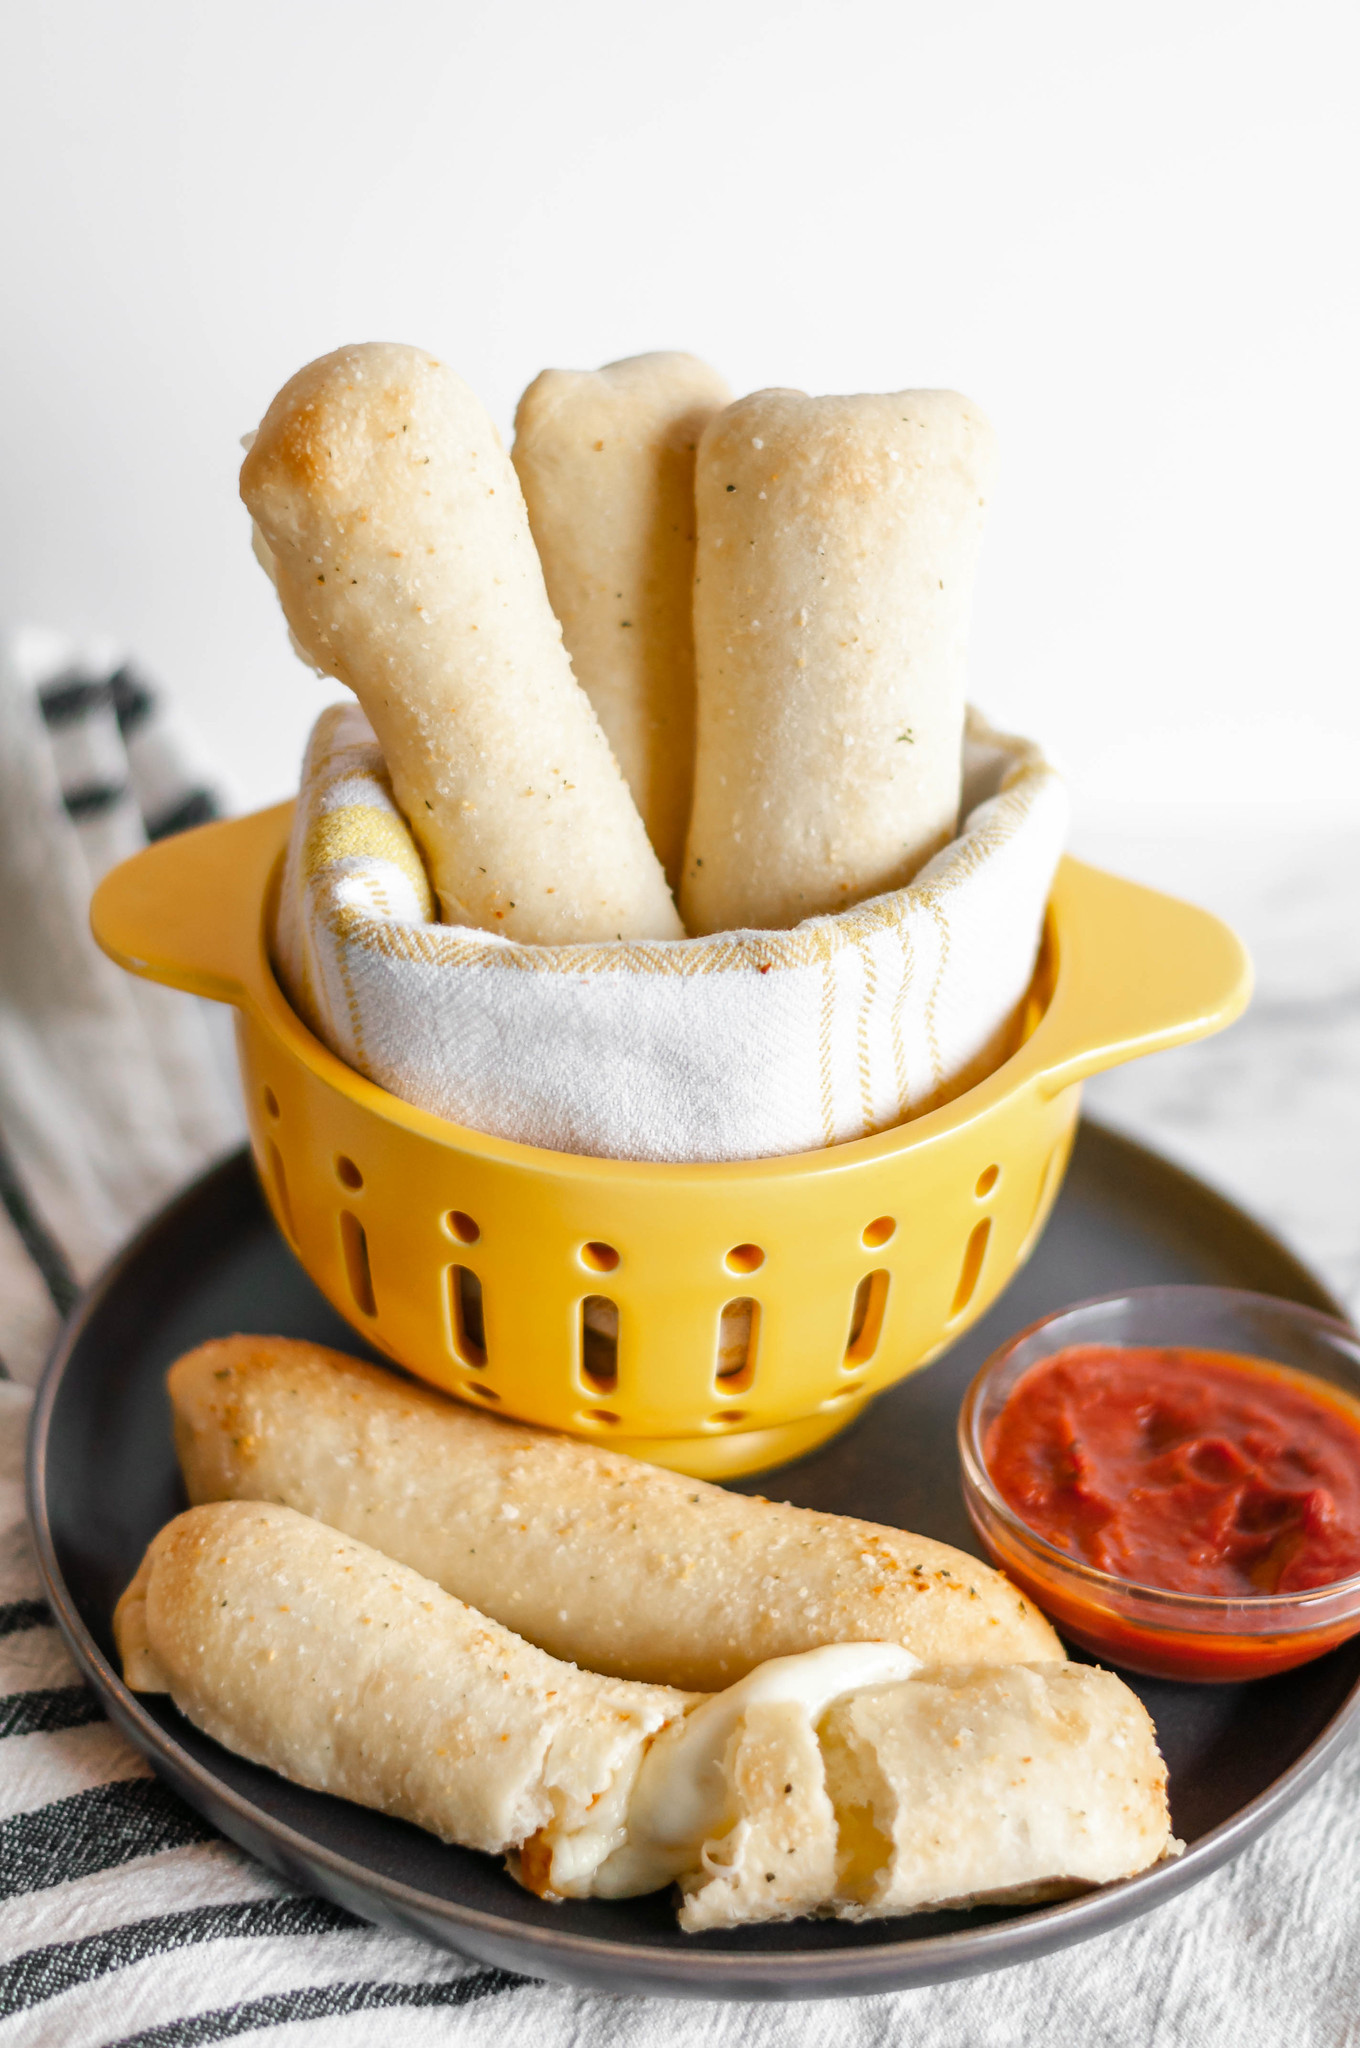 Cheese Stuffed Breadsticks are super simple, 4 ingredient perfection. Pizza dough, string cheese, butter and garlic salt are all you need for this cheesy, carb deliciousness.